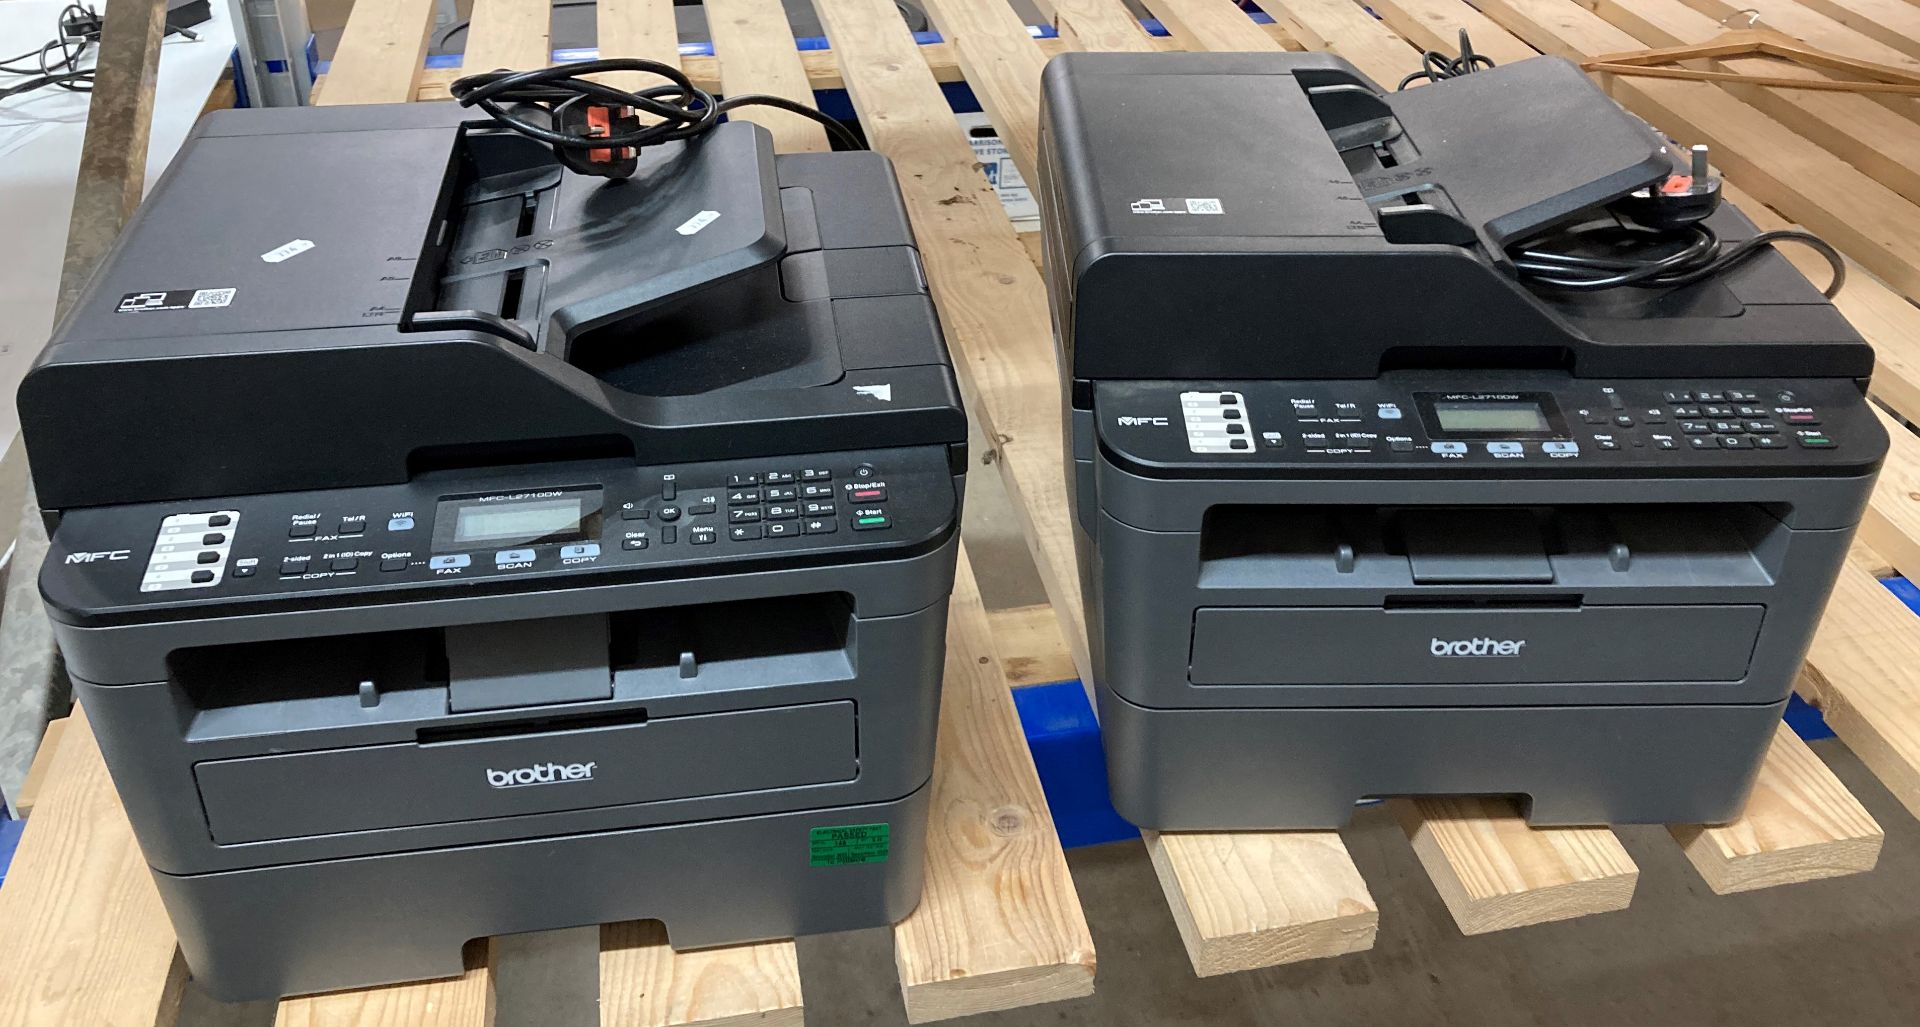 2 x Brother MFC-L2710DL all-in-one printer scanner copier fax machines (saleroom location: J12)